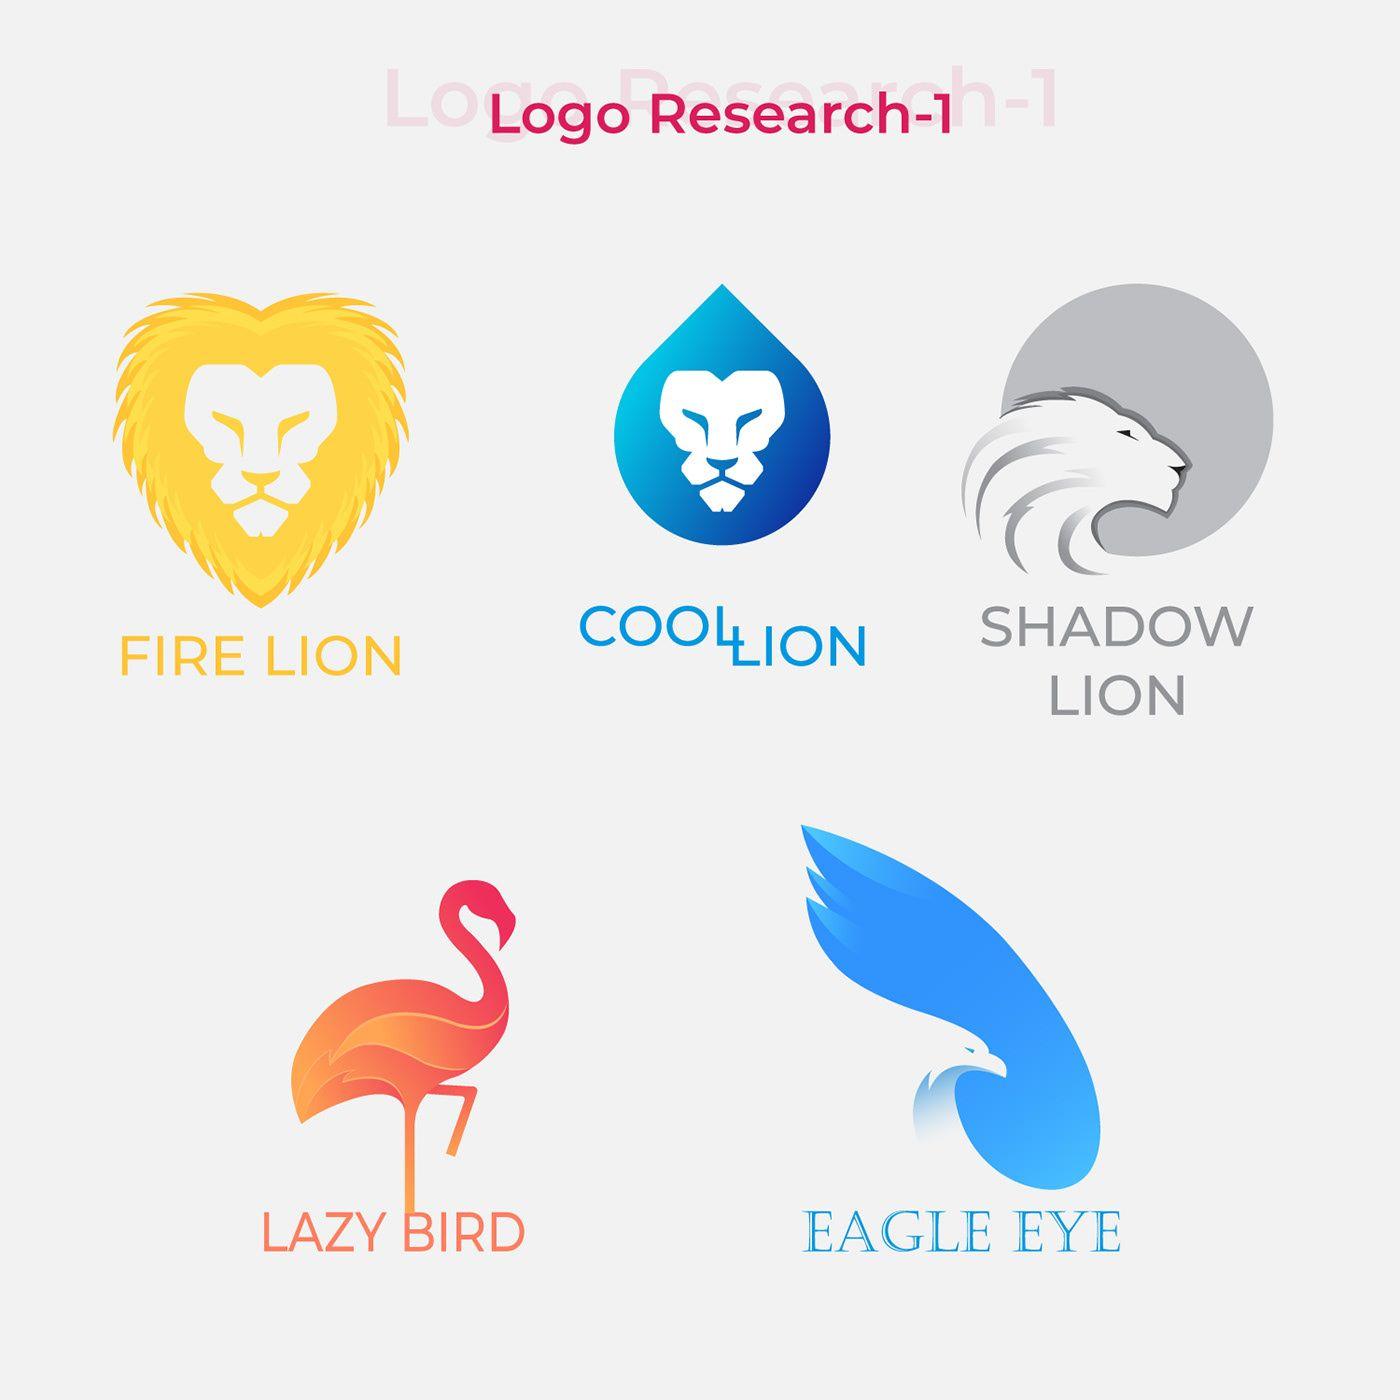 Financial Institution with Lion Logo - 230+ Lion Logo Designs for Inspiration | Graphic Design Resources